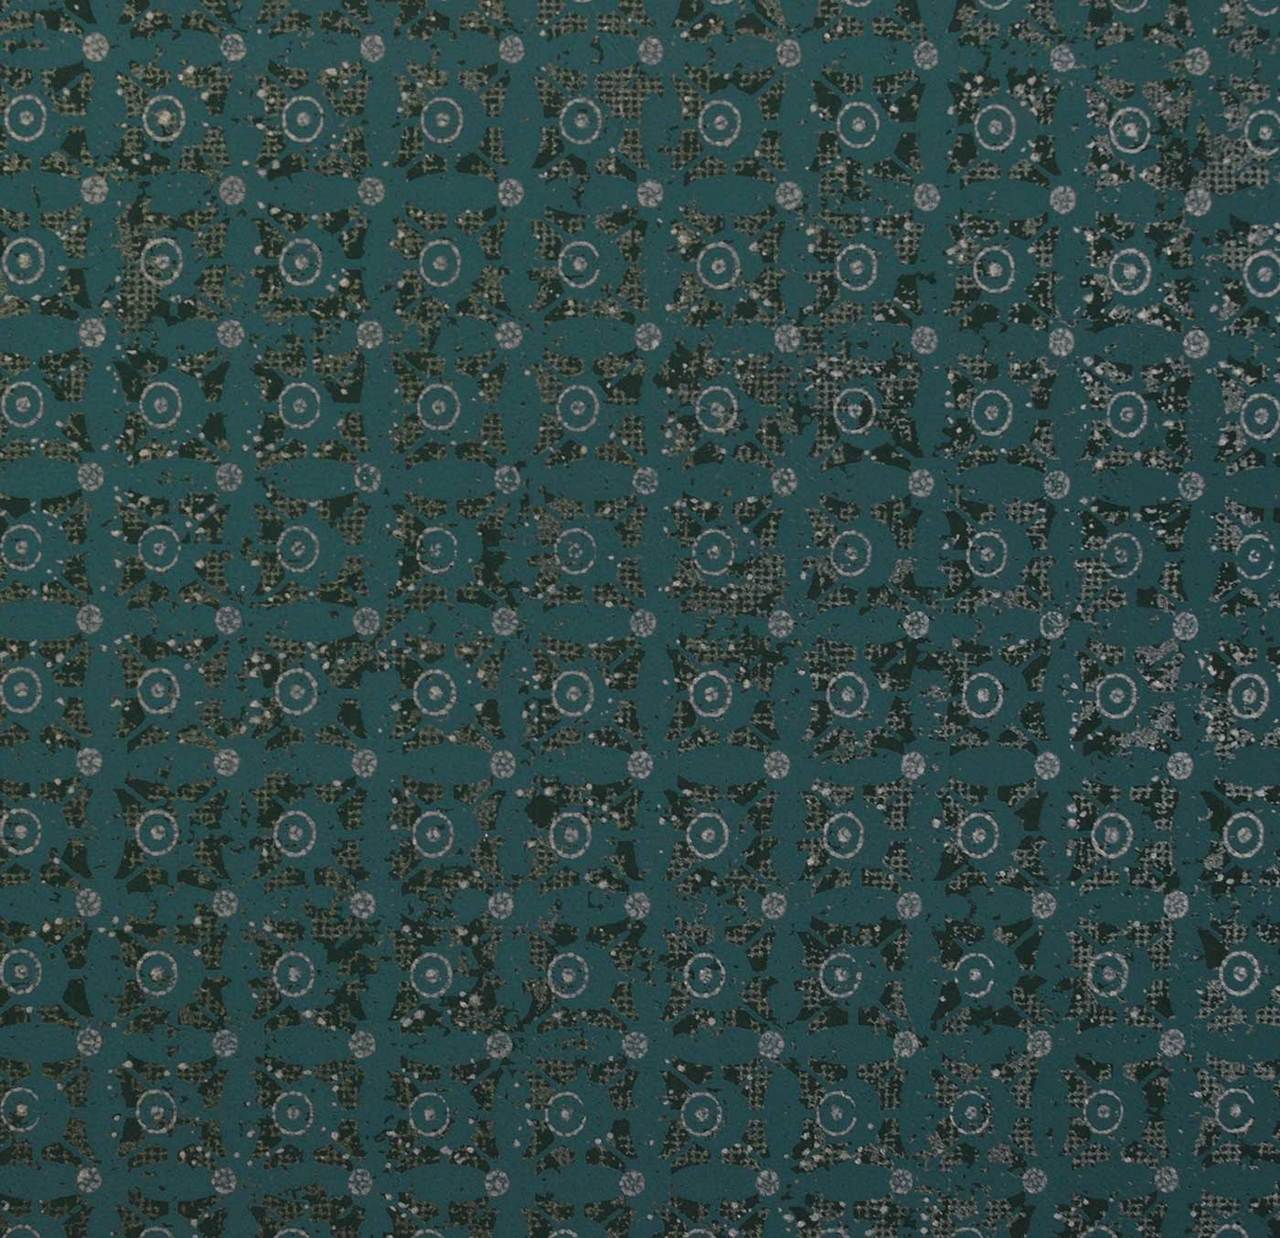 Classico Tile Pattern wallpaper- Teal Blue